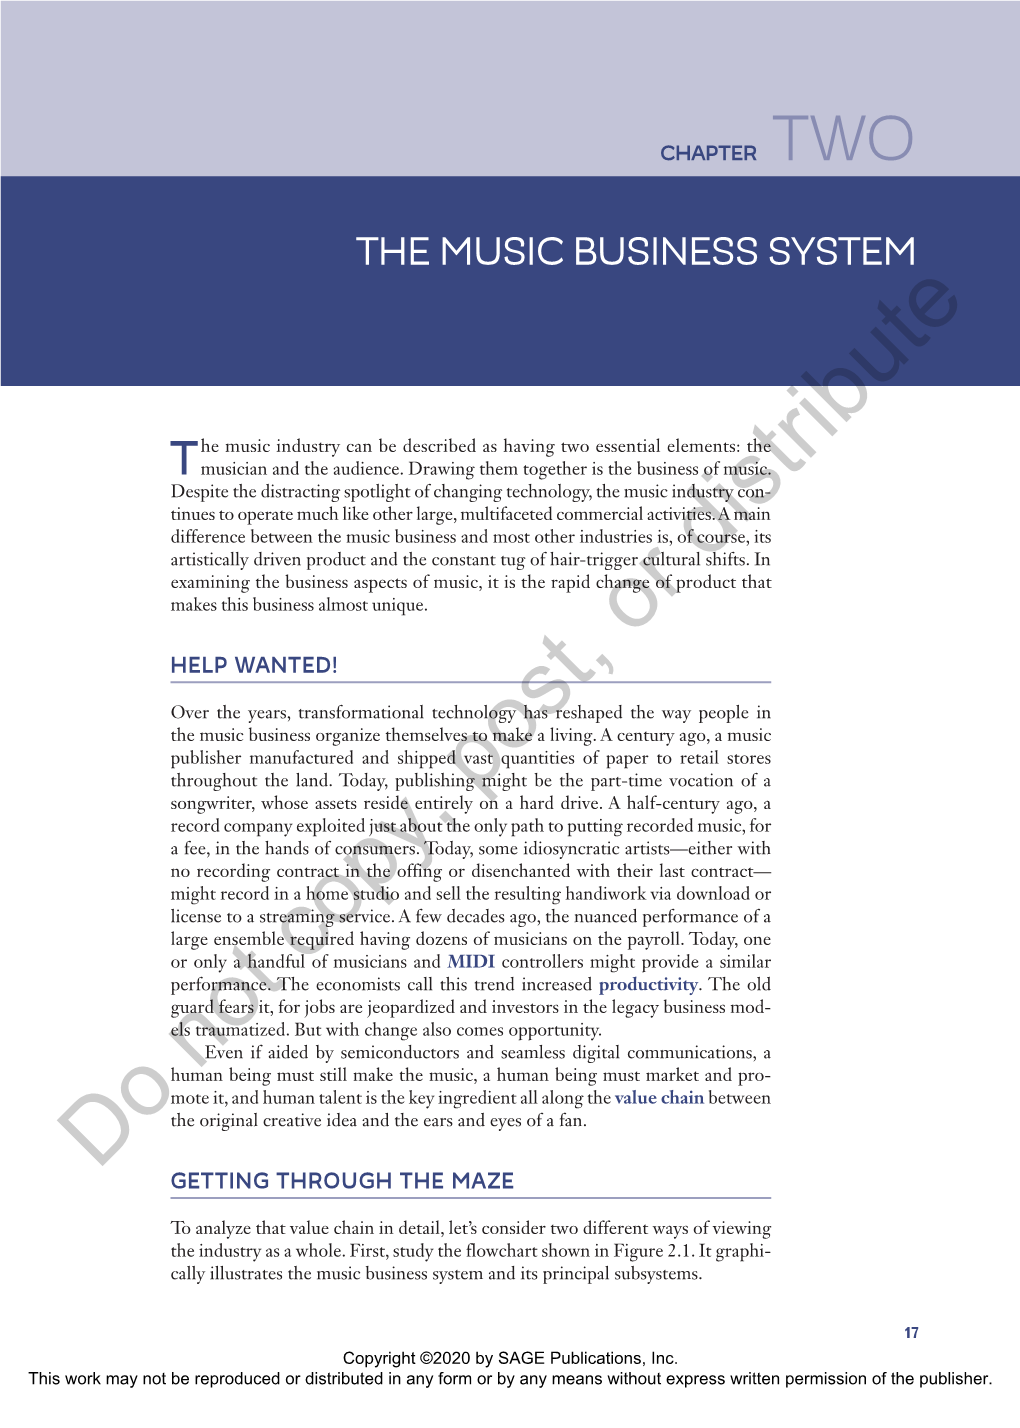 The Music Business System